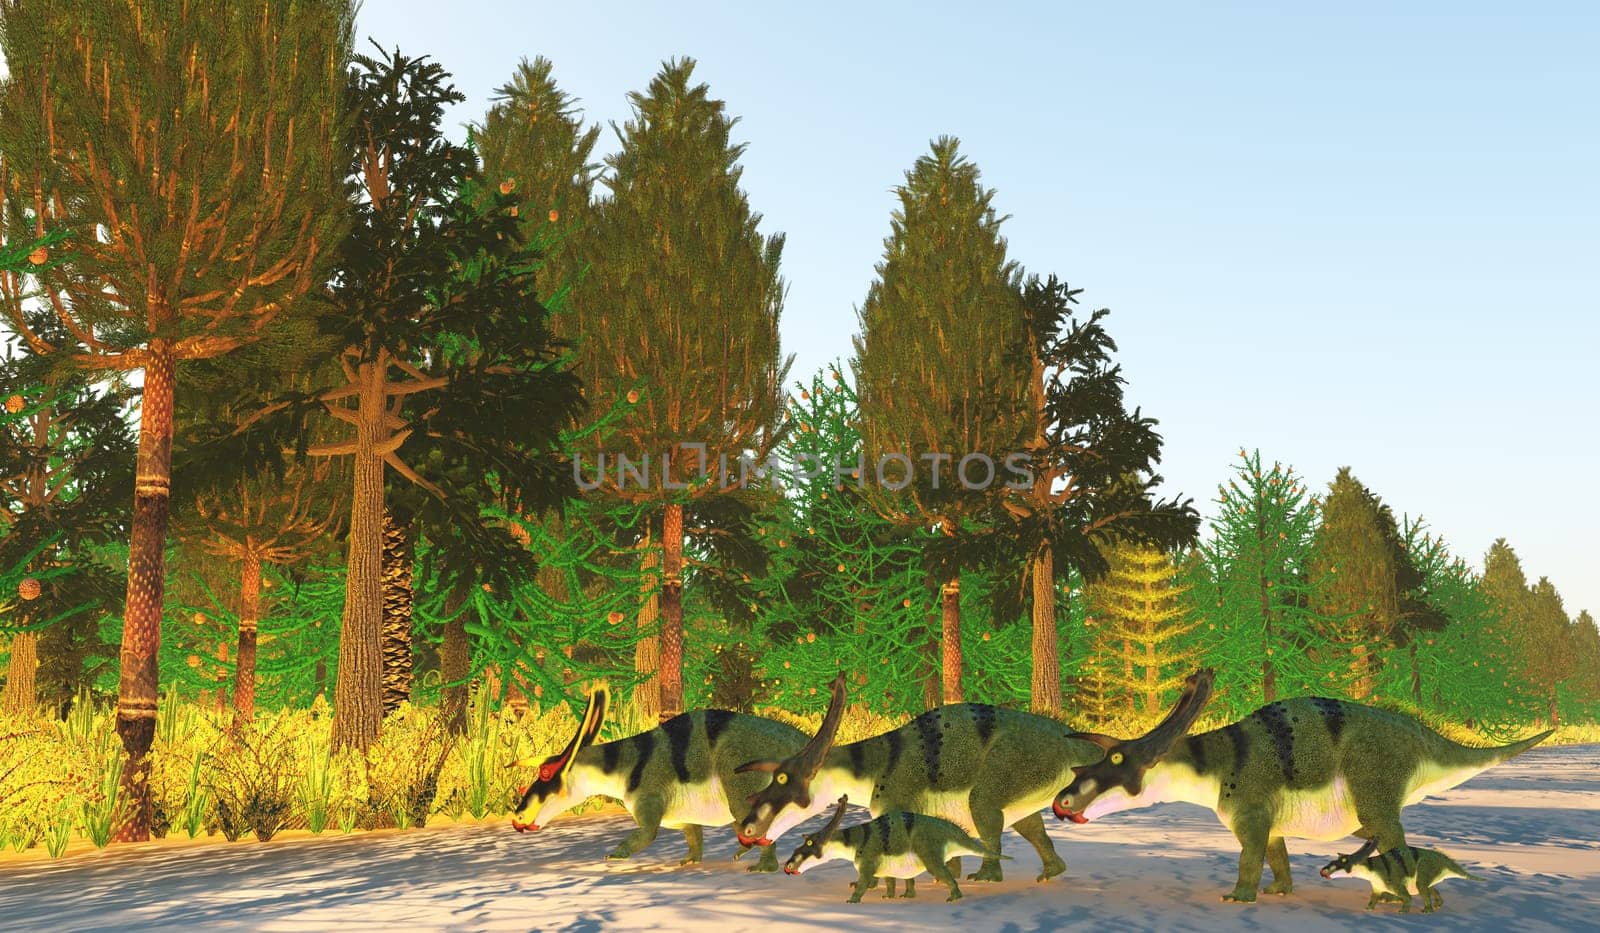 The Anchiceratops dinosaur lived in herds for protection from predators during the Cretaceous Period of Canada.